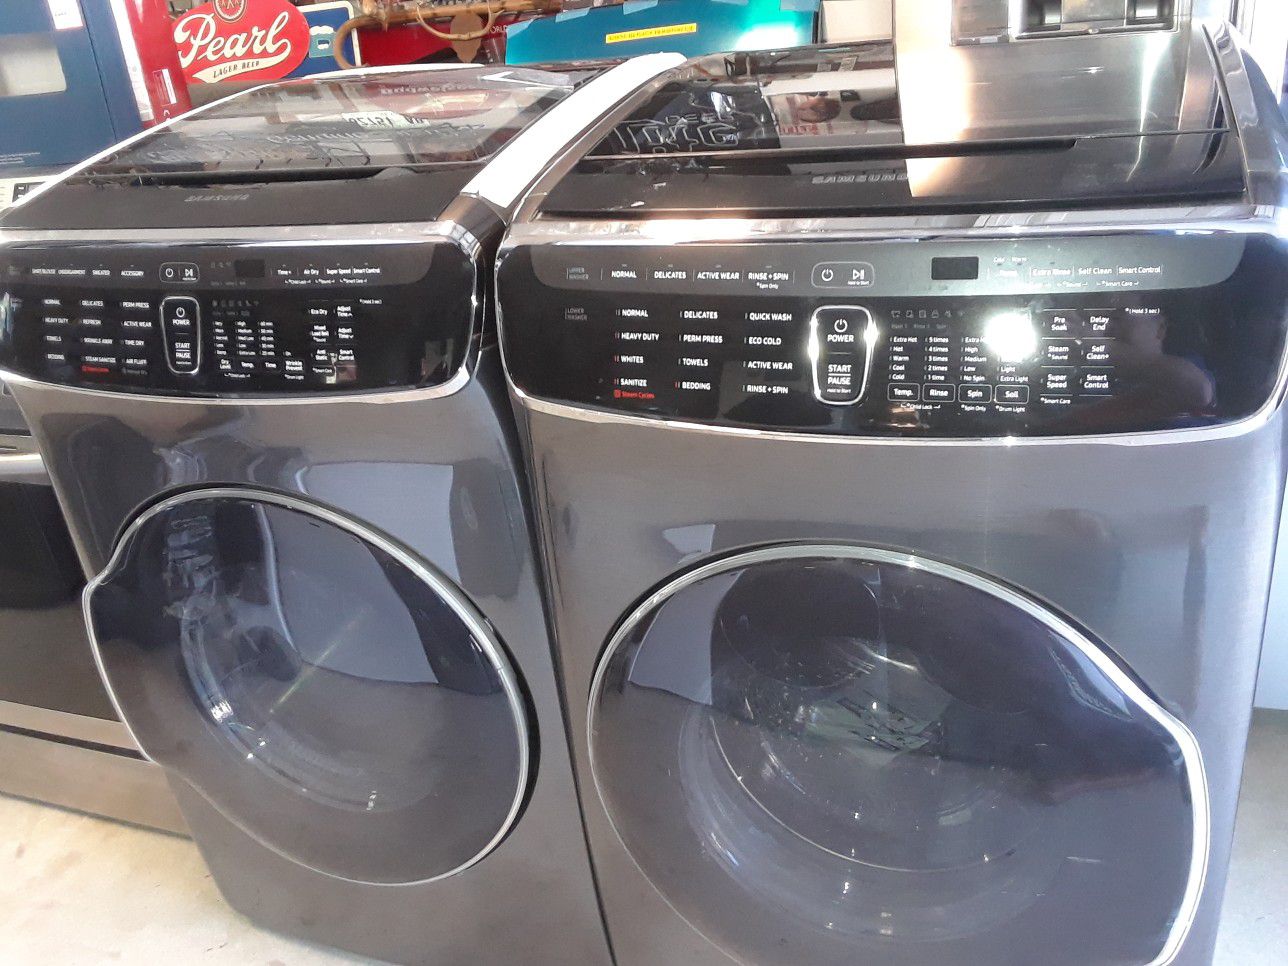 Samsung Dual Washer and dryer